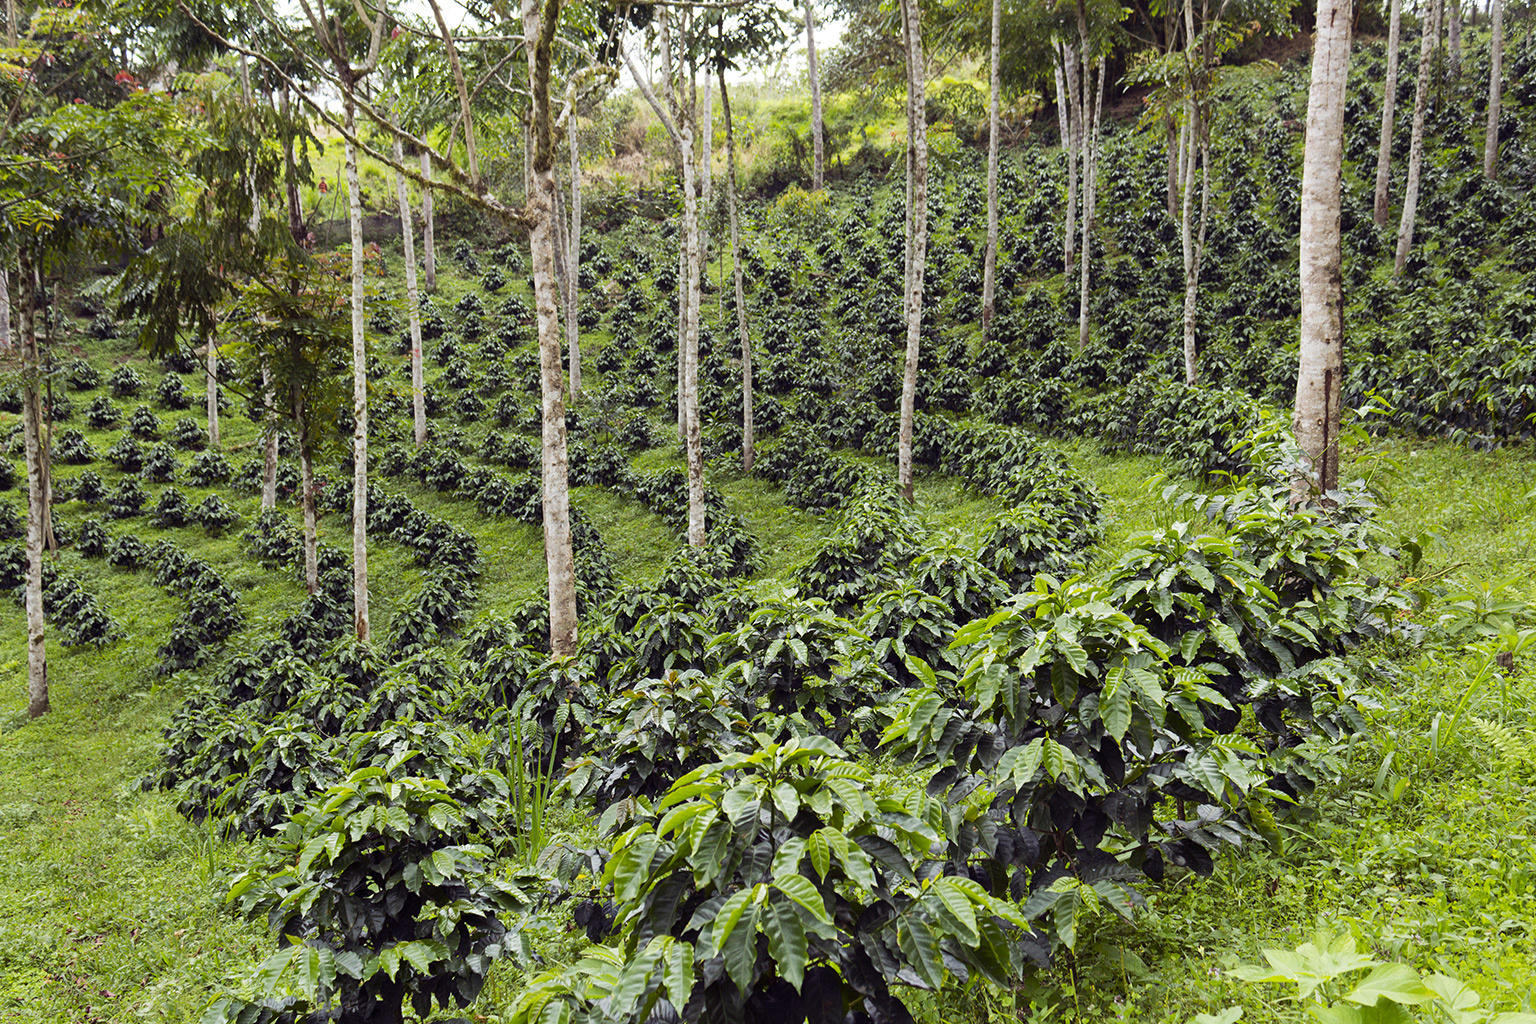 Coffee plantation in the Andes. Photo credit: Morley Read